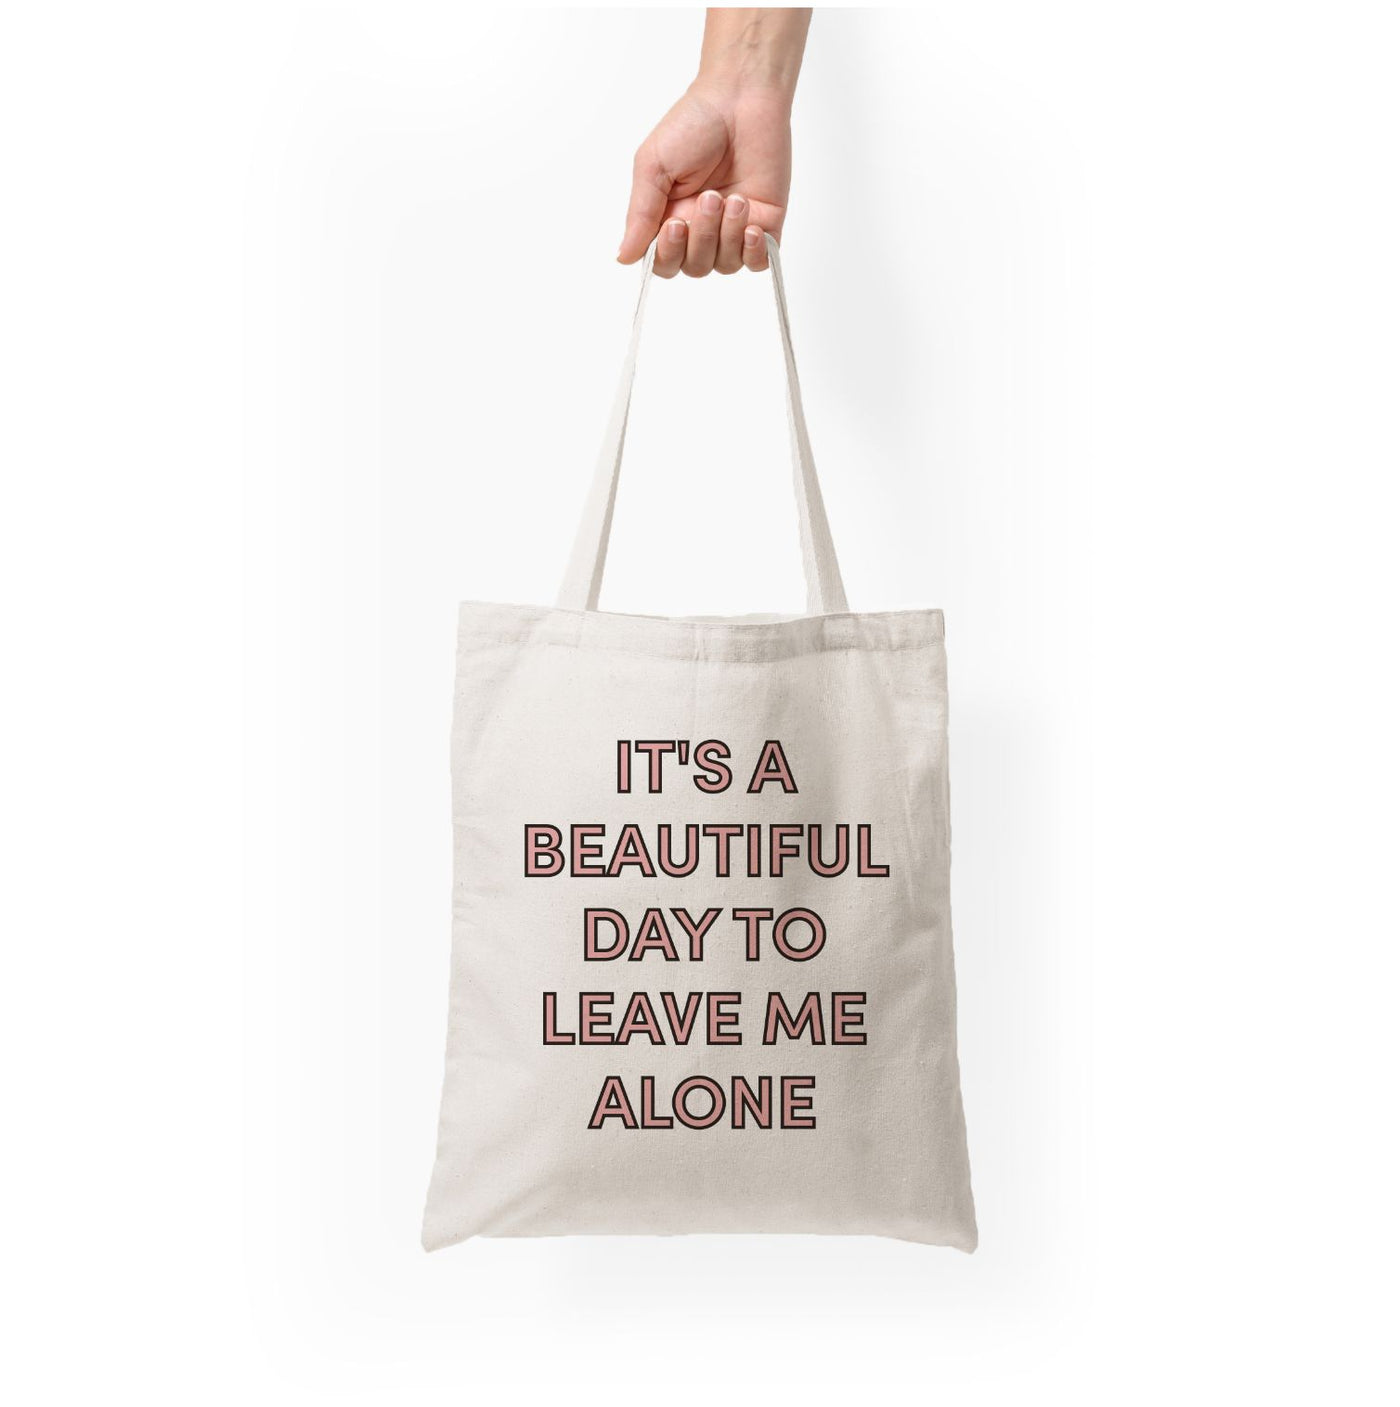 It's A Beautiful Day To Leave Me Alone Tote Bag